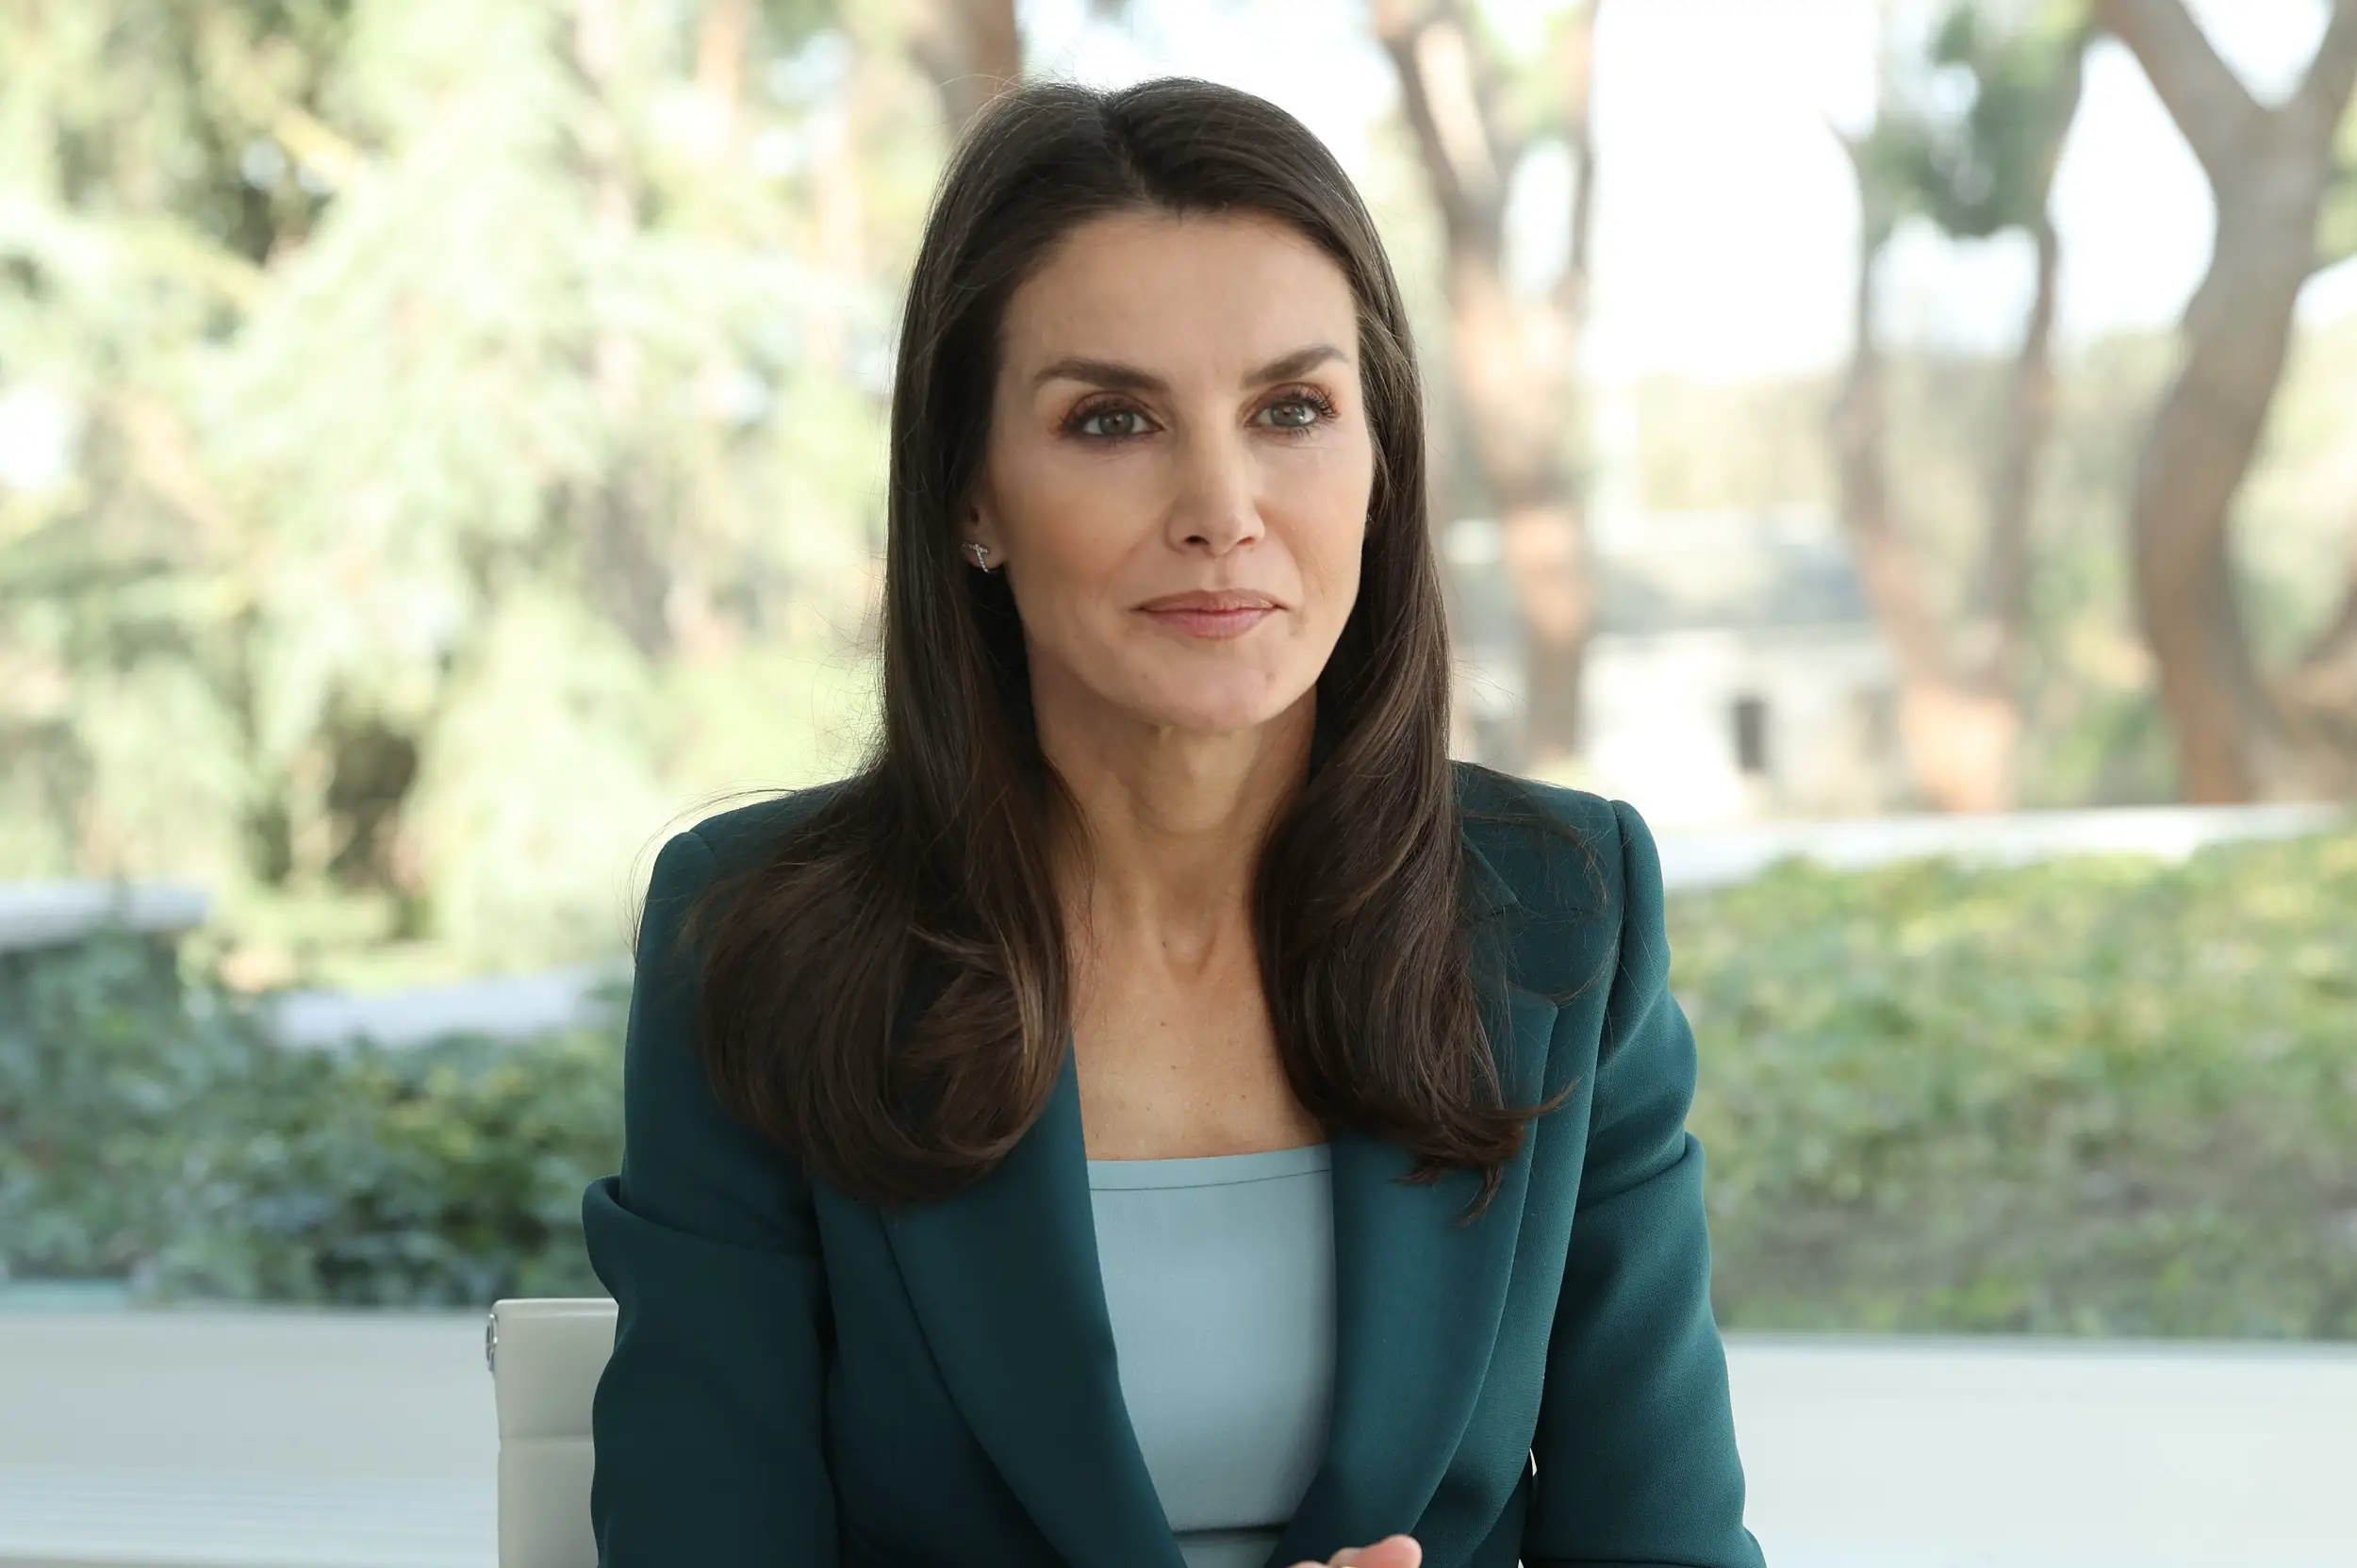 Queen Letizia of Spain's virtual and lockdown style